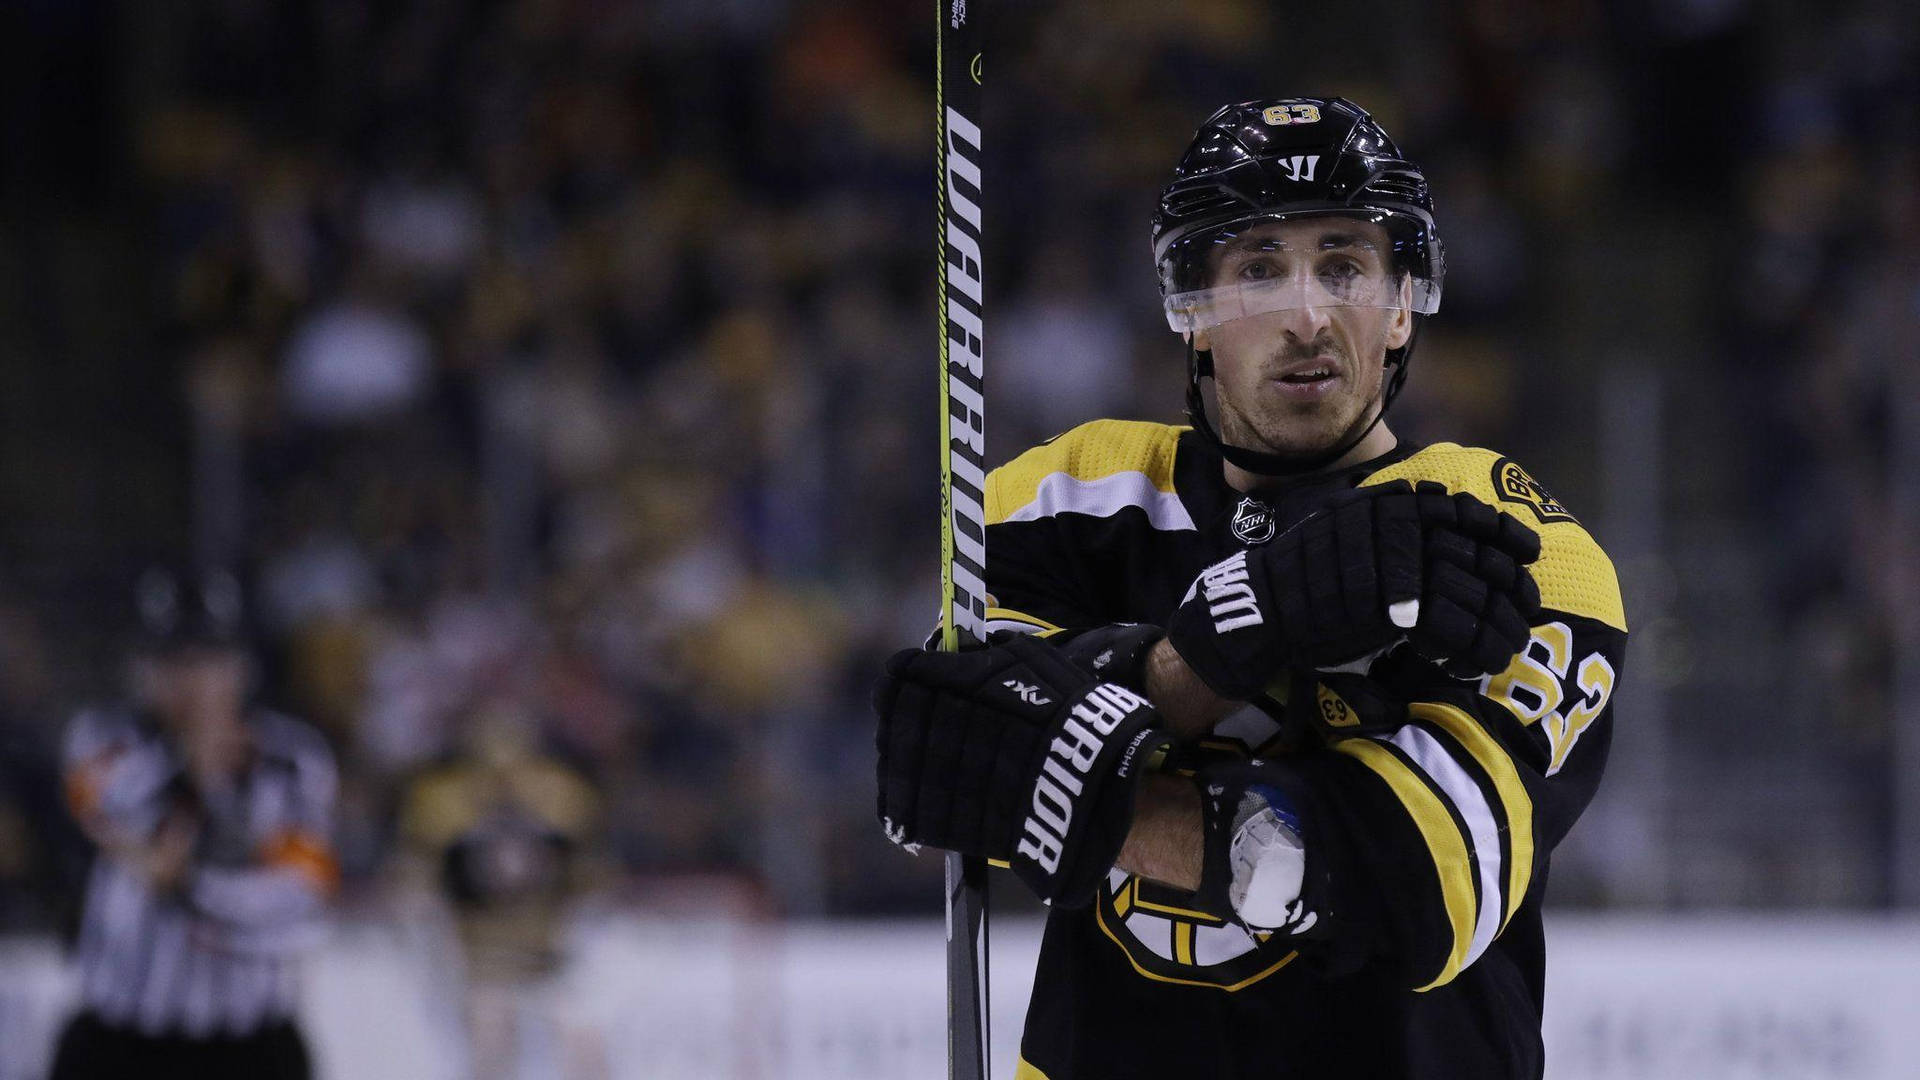 Caption: Brad Marchand: The Shining Star of NHL Wallpaper